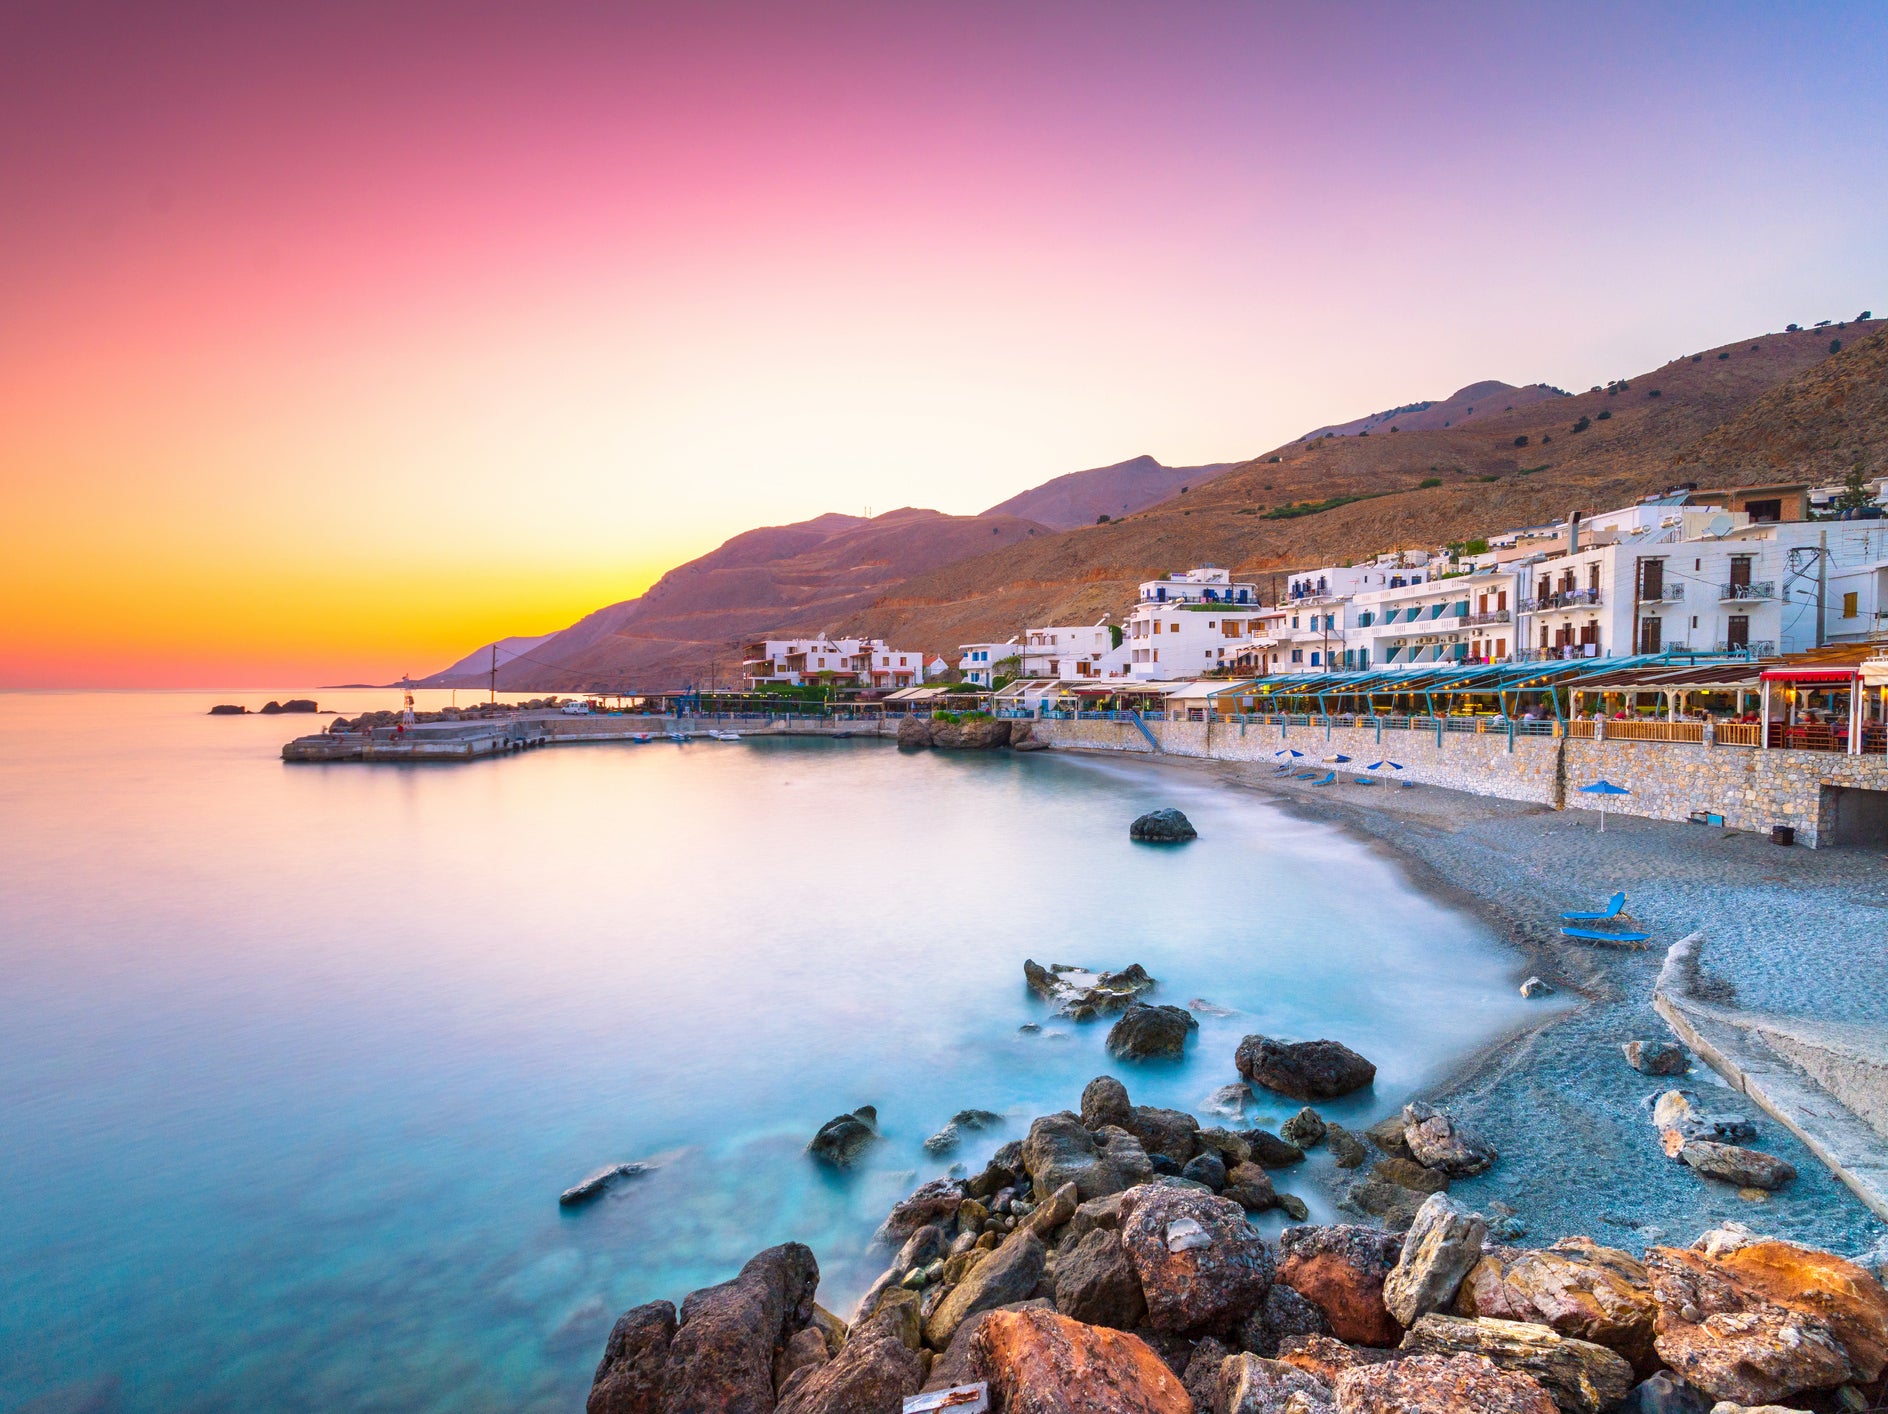 Does Crete take your fancy? It could cost you more this year